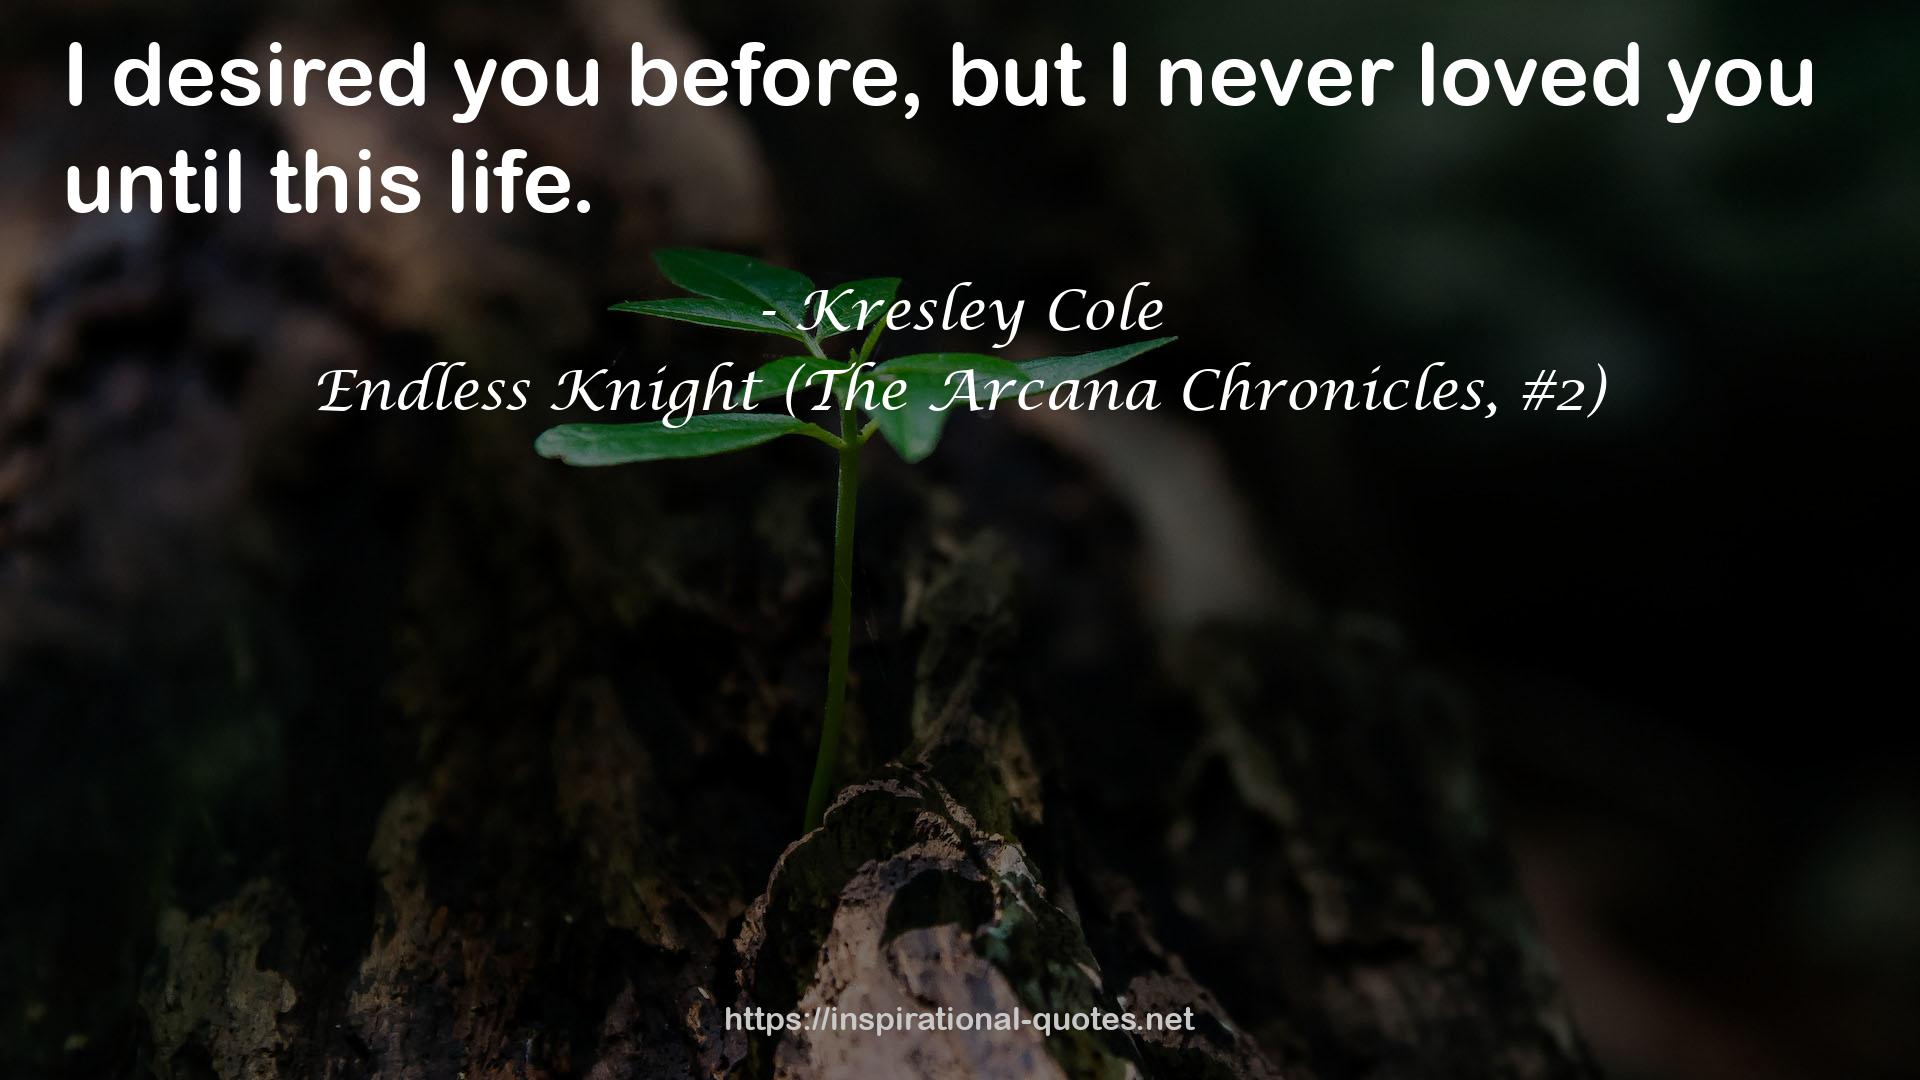 Endless Knight (The Arcana Chronicles, #2) QUOTES